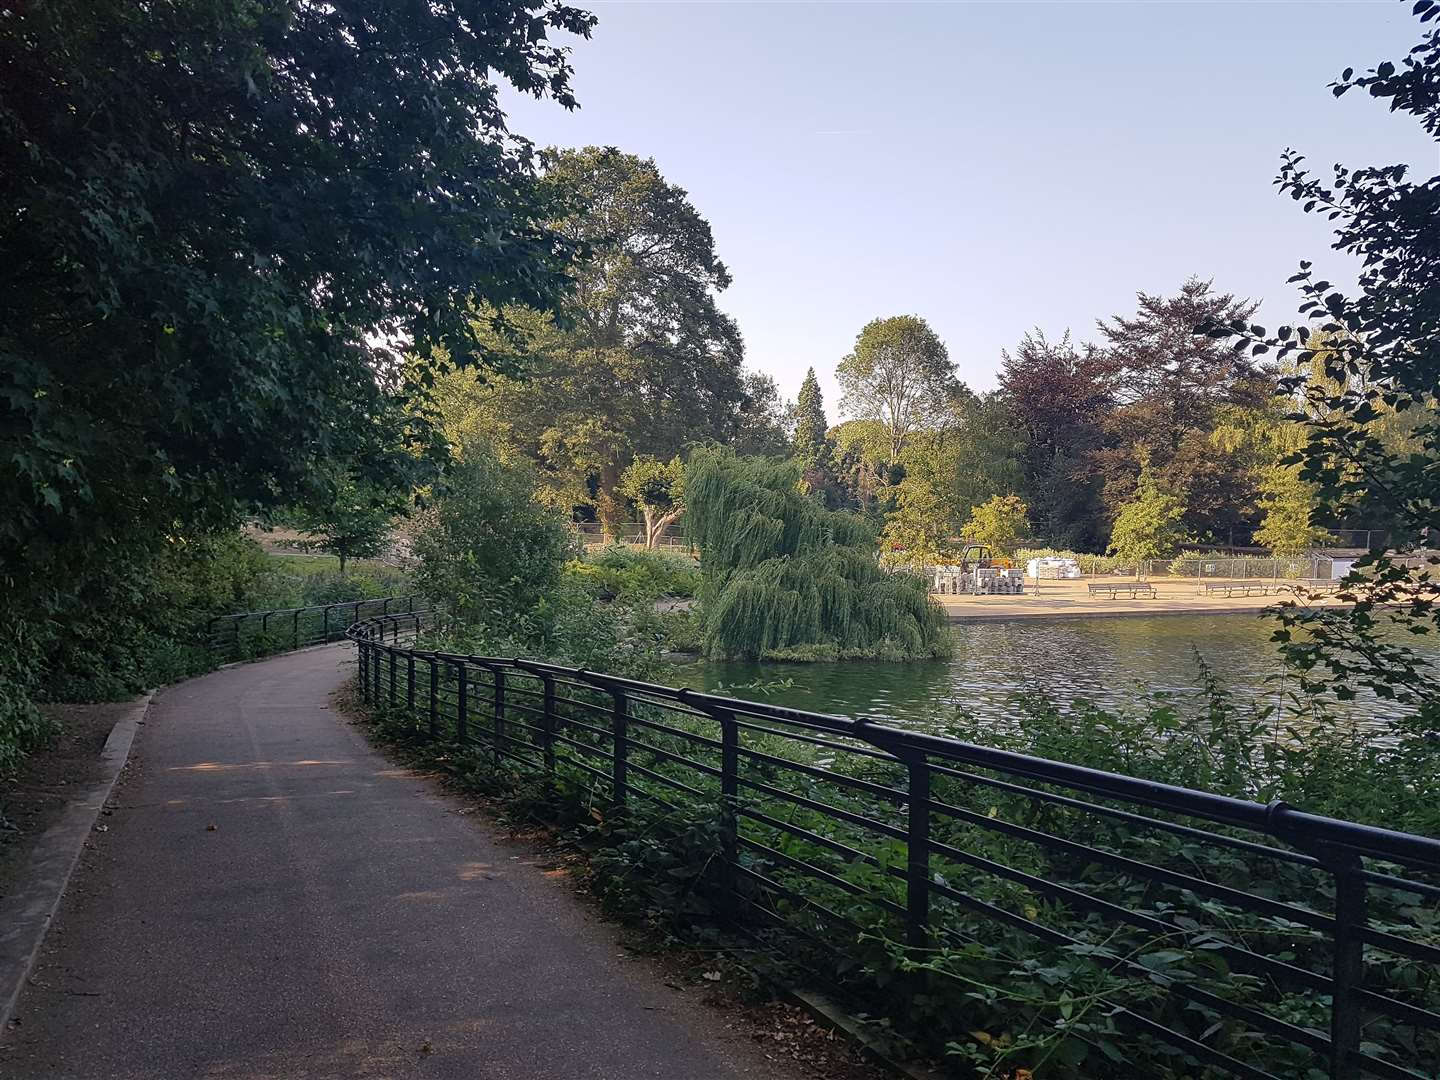 Police are appealing after a naked man reportedly walked through Mote Park in Maidstone